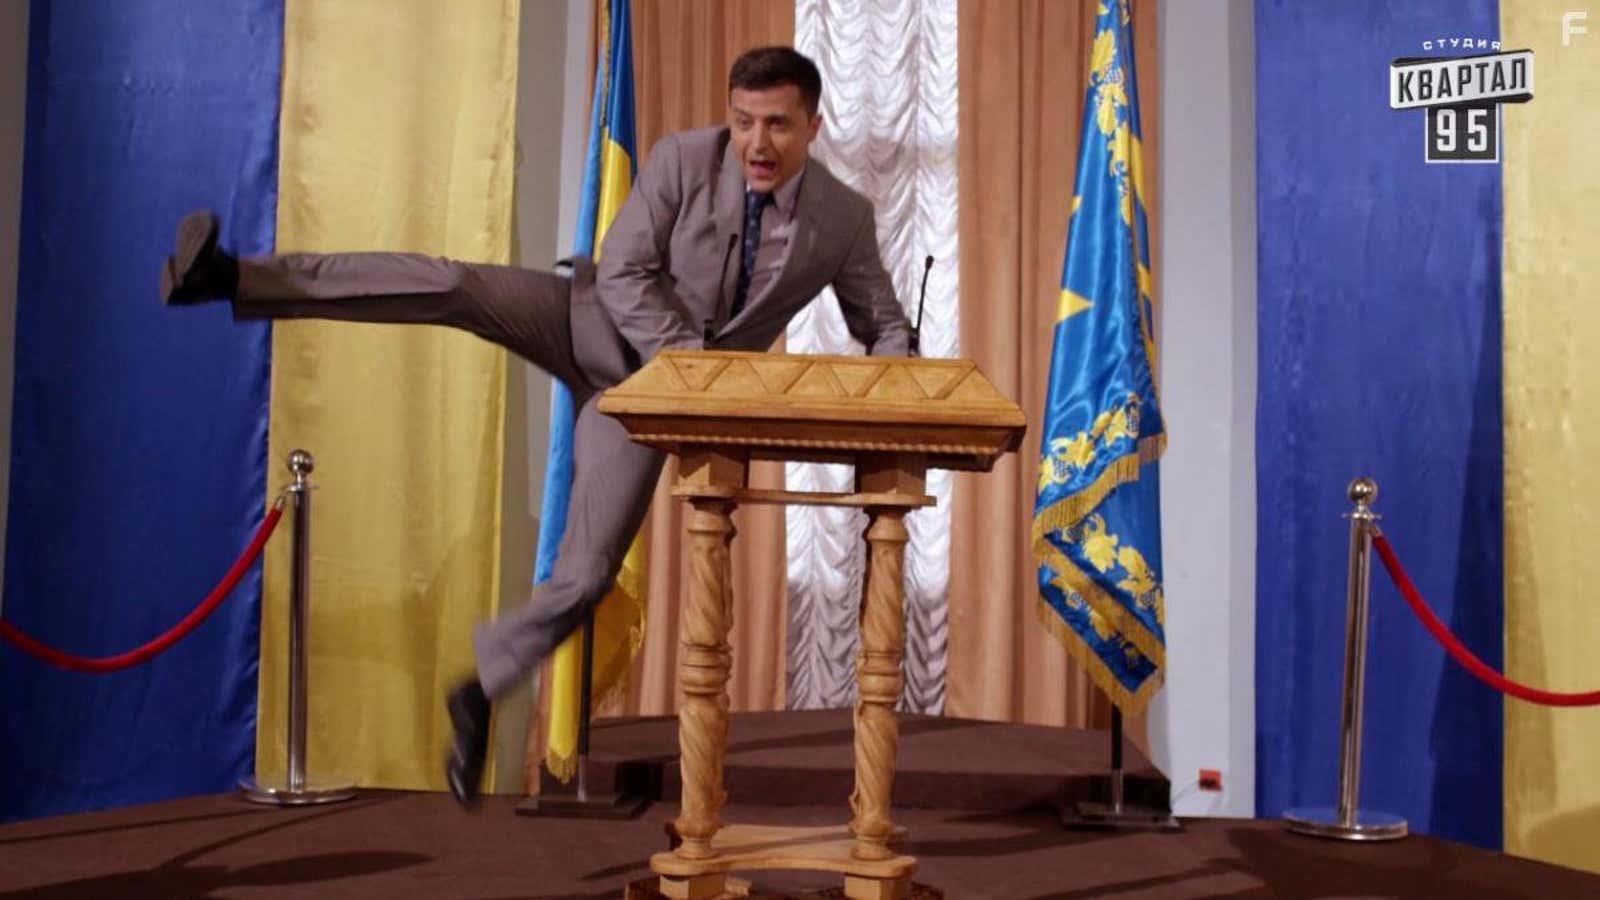 Volodymyr Zelensky plays the president of Ukraine on TV and, soon, in real life.